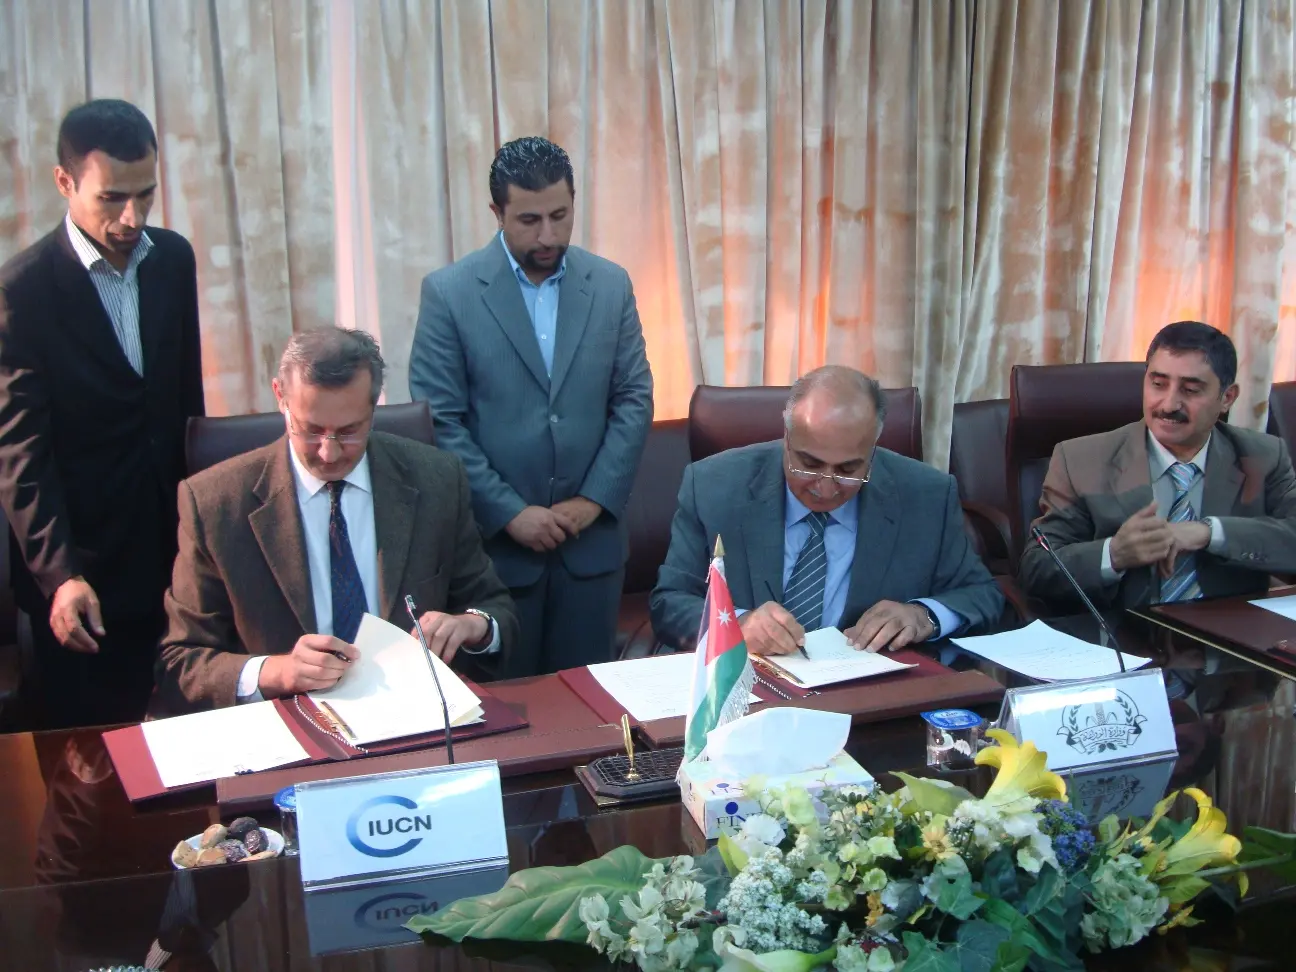 Minister of Agriculture in Jordan and IUCN West Asia Regional Director sign agreement to improve livelihoods in drylands and rangelands in Jordan